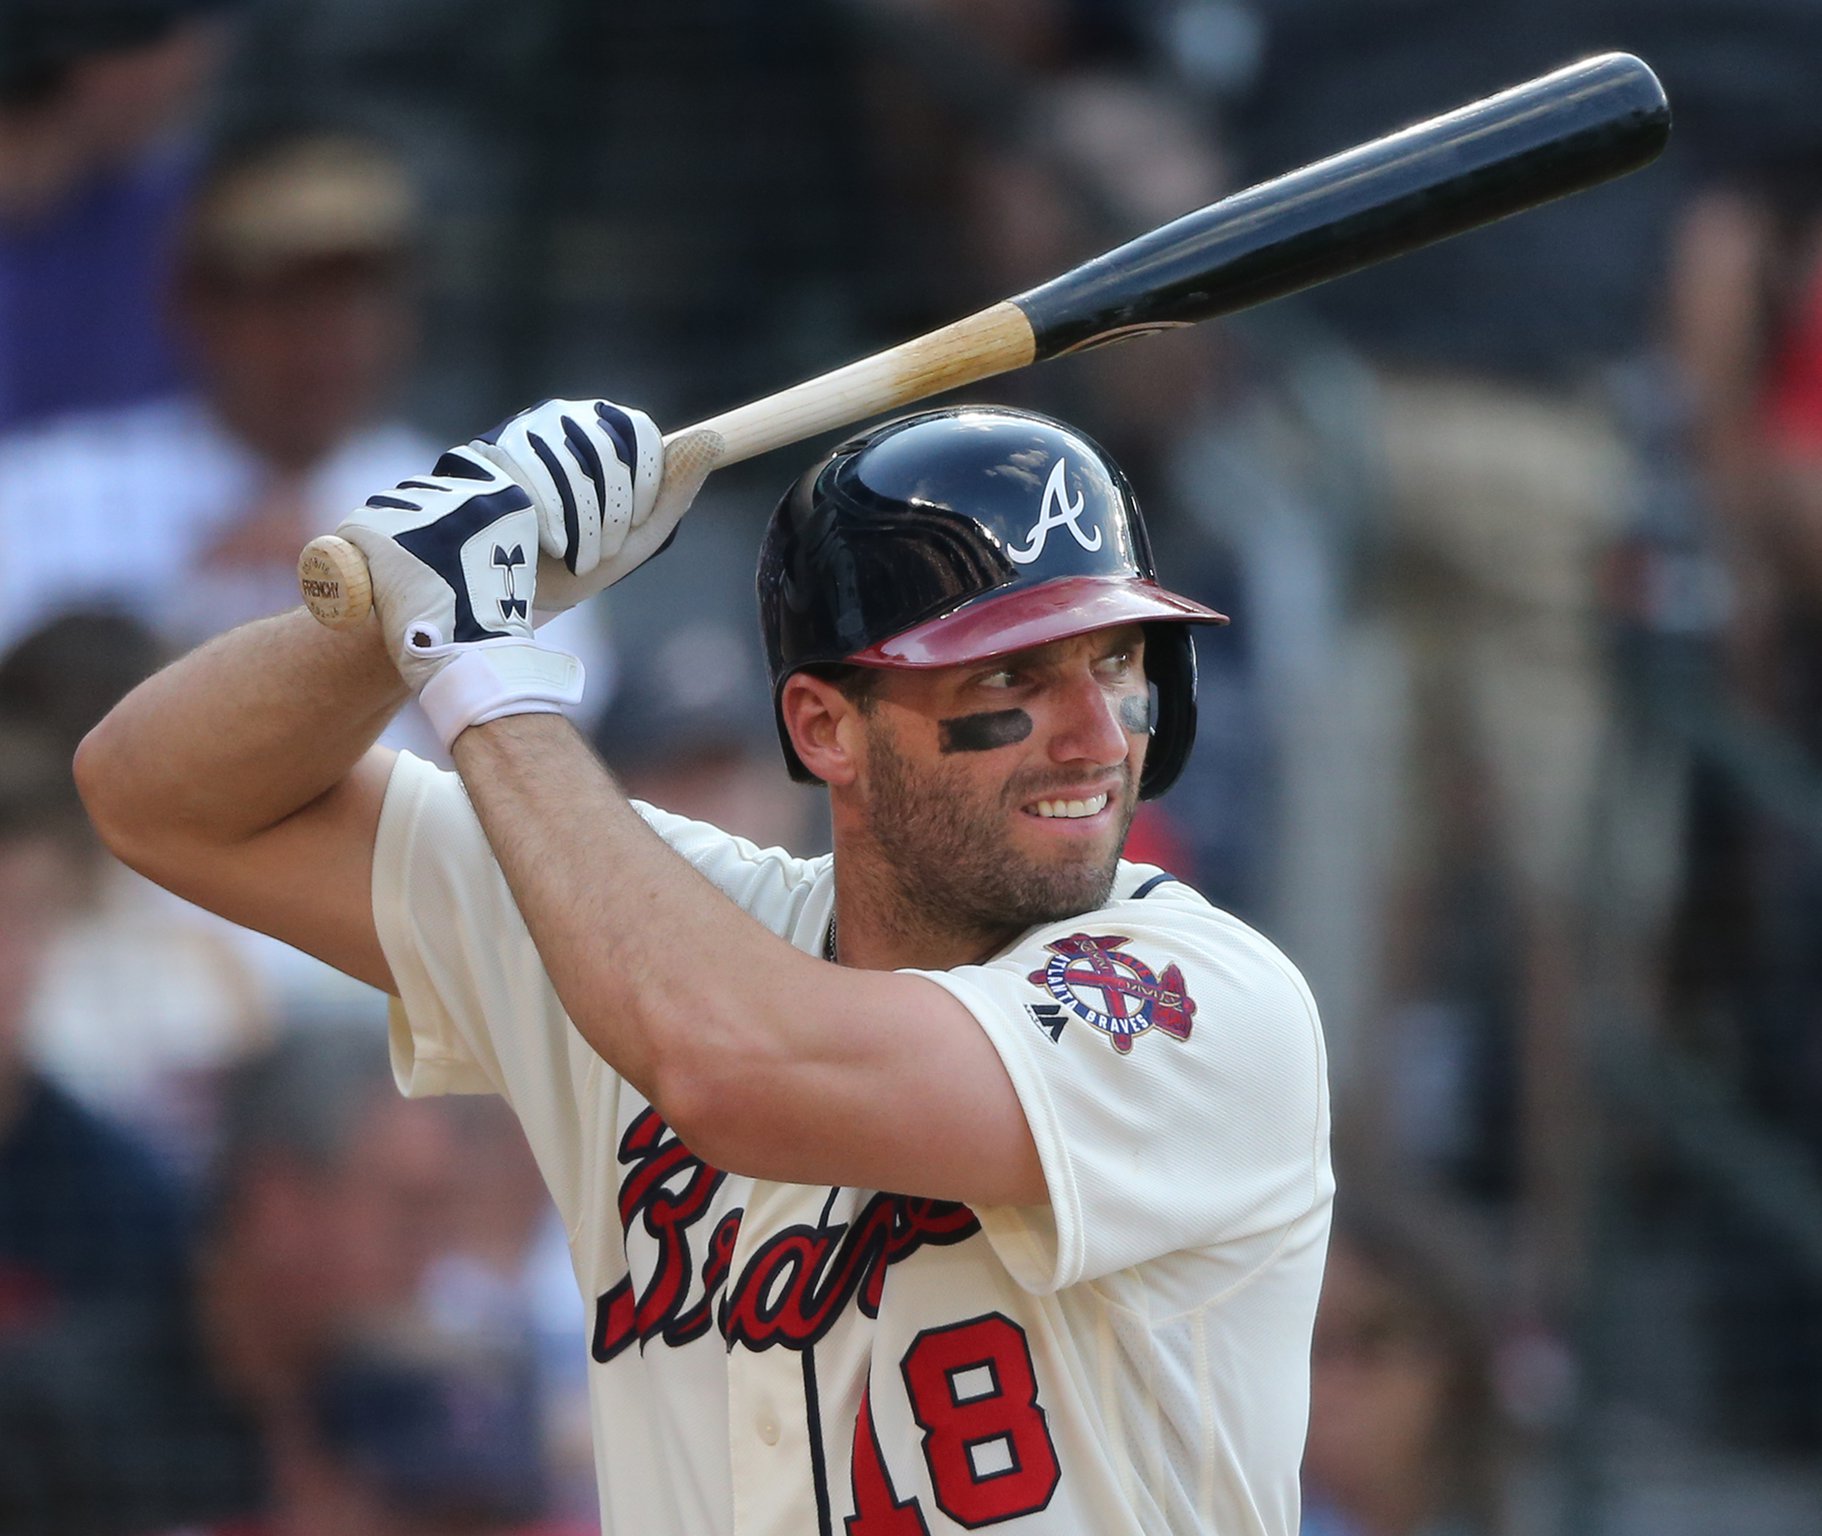 Jeff Francoeur quietly slides into the next phase